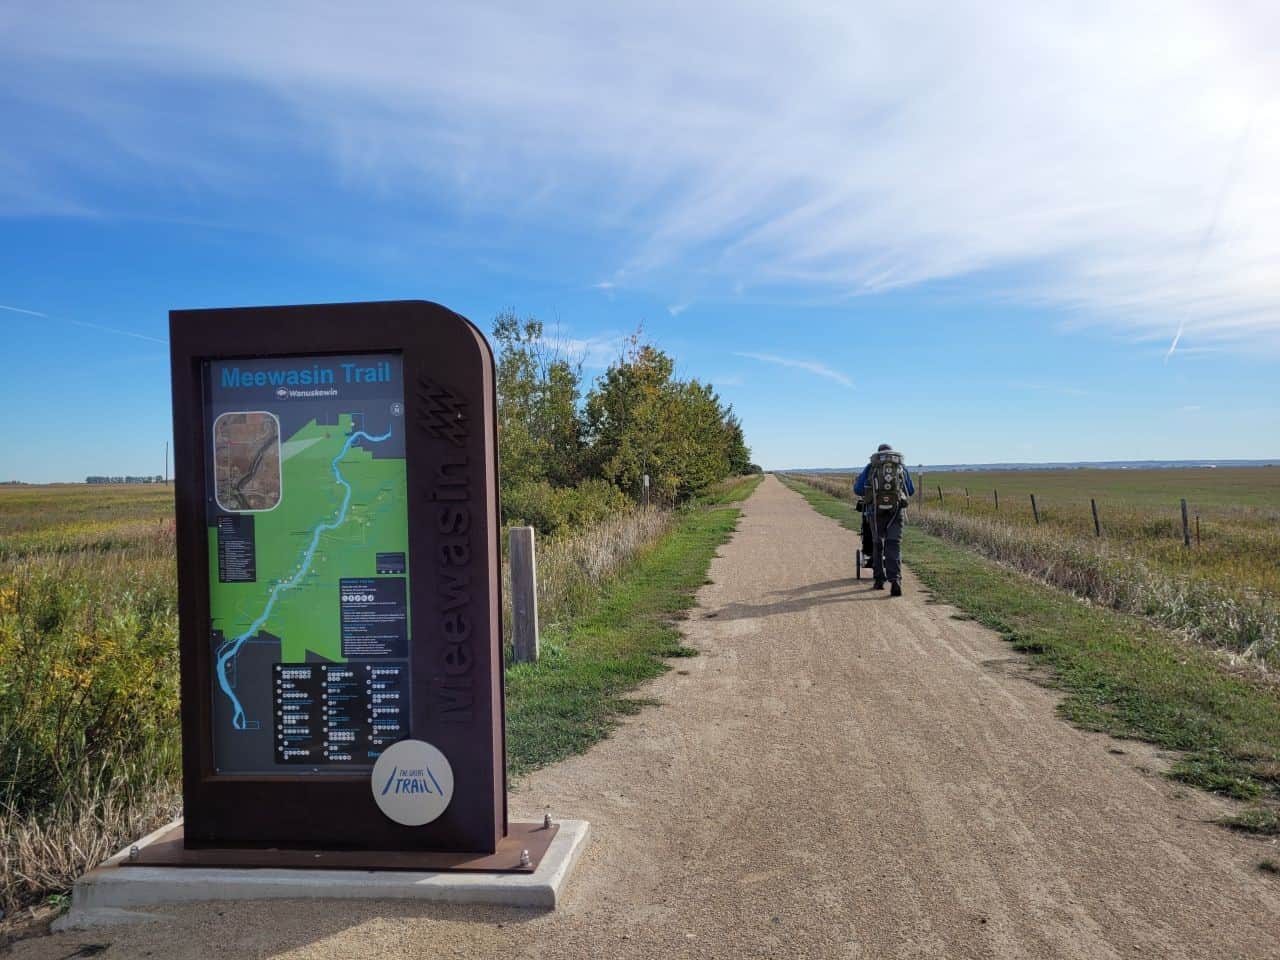 The Meewasin Trail is over 60 km long, following the contours of the South Saskatchewan River from Pike Lake to Clarke's Crossing, passing through Saskatoon.